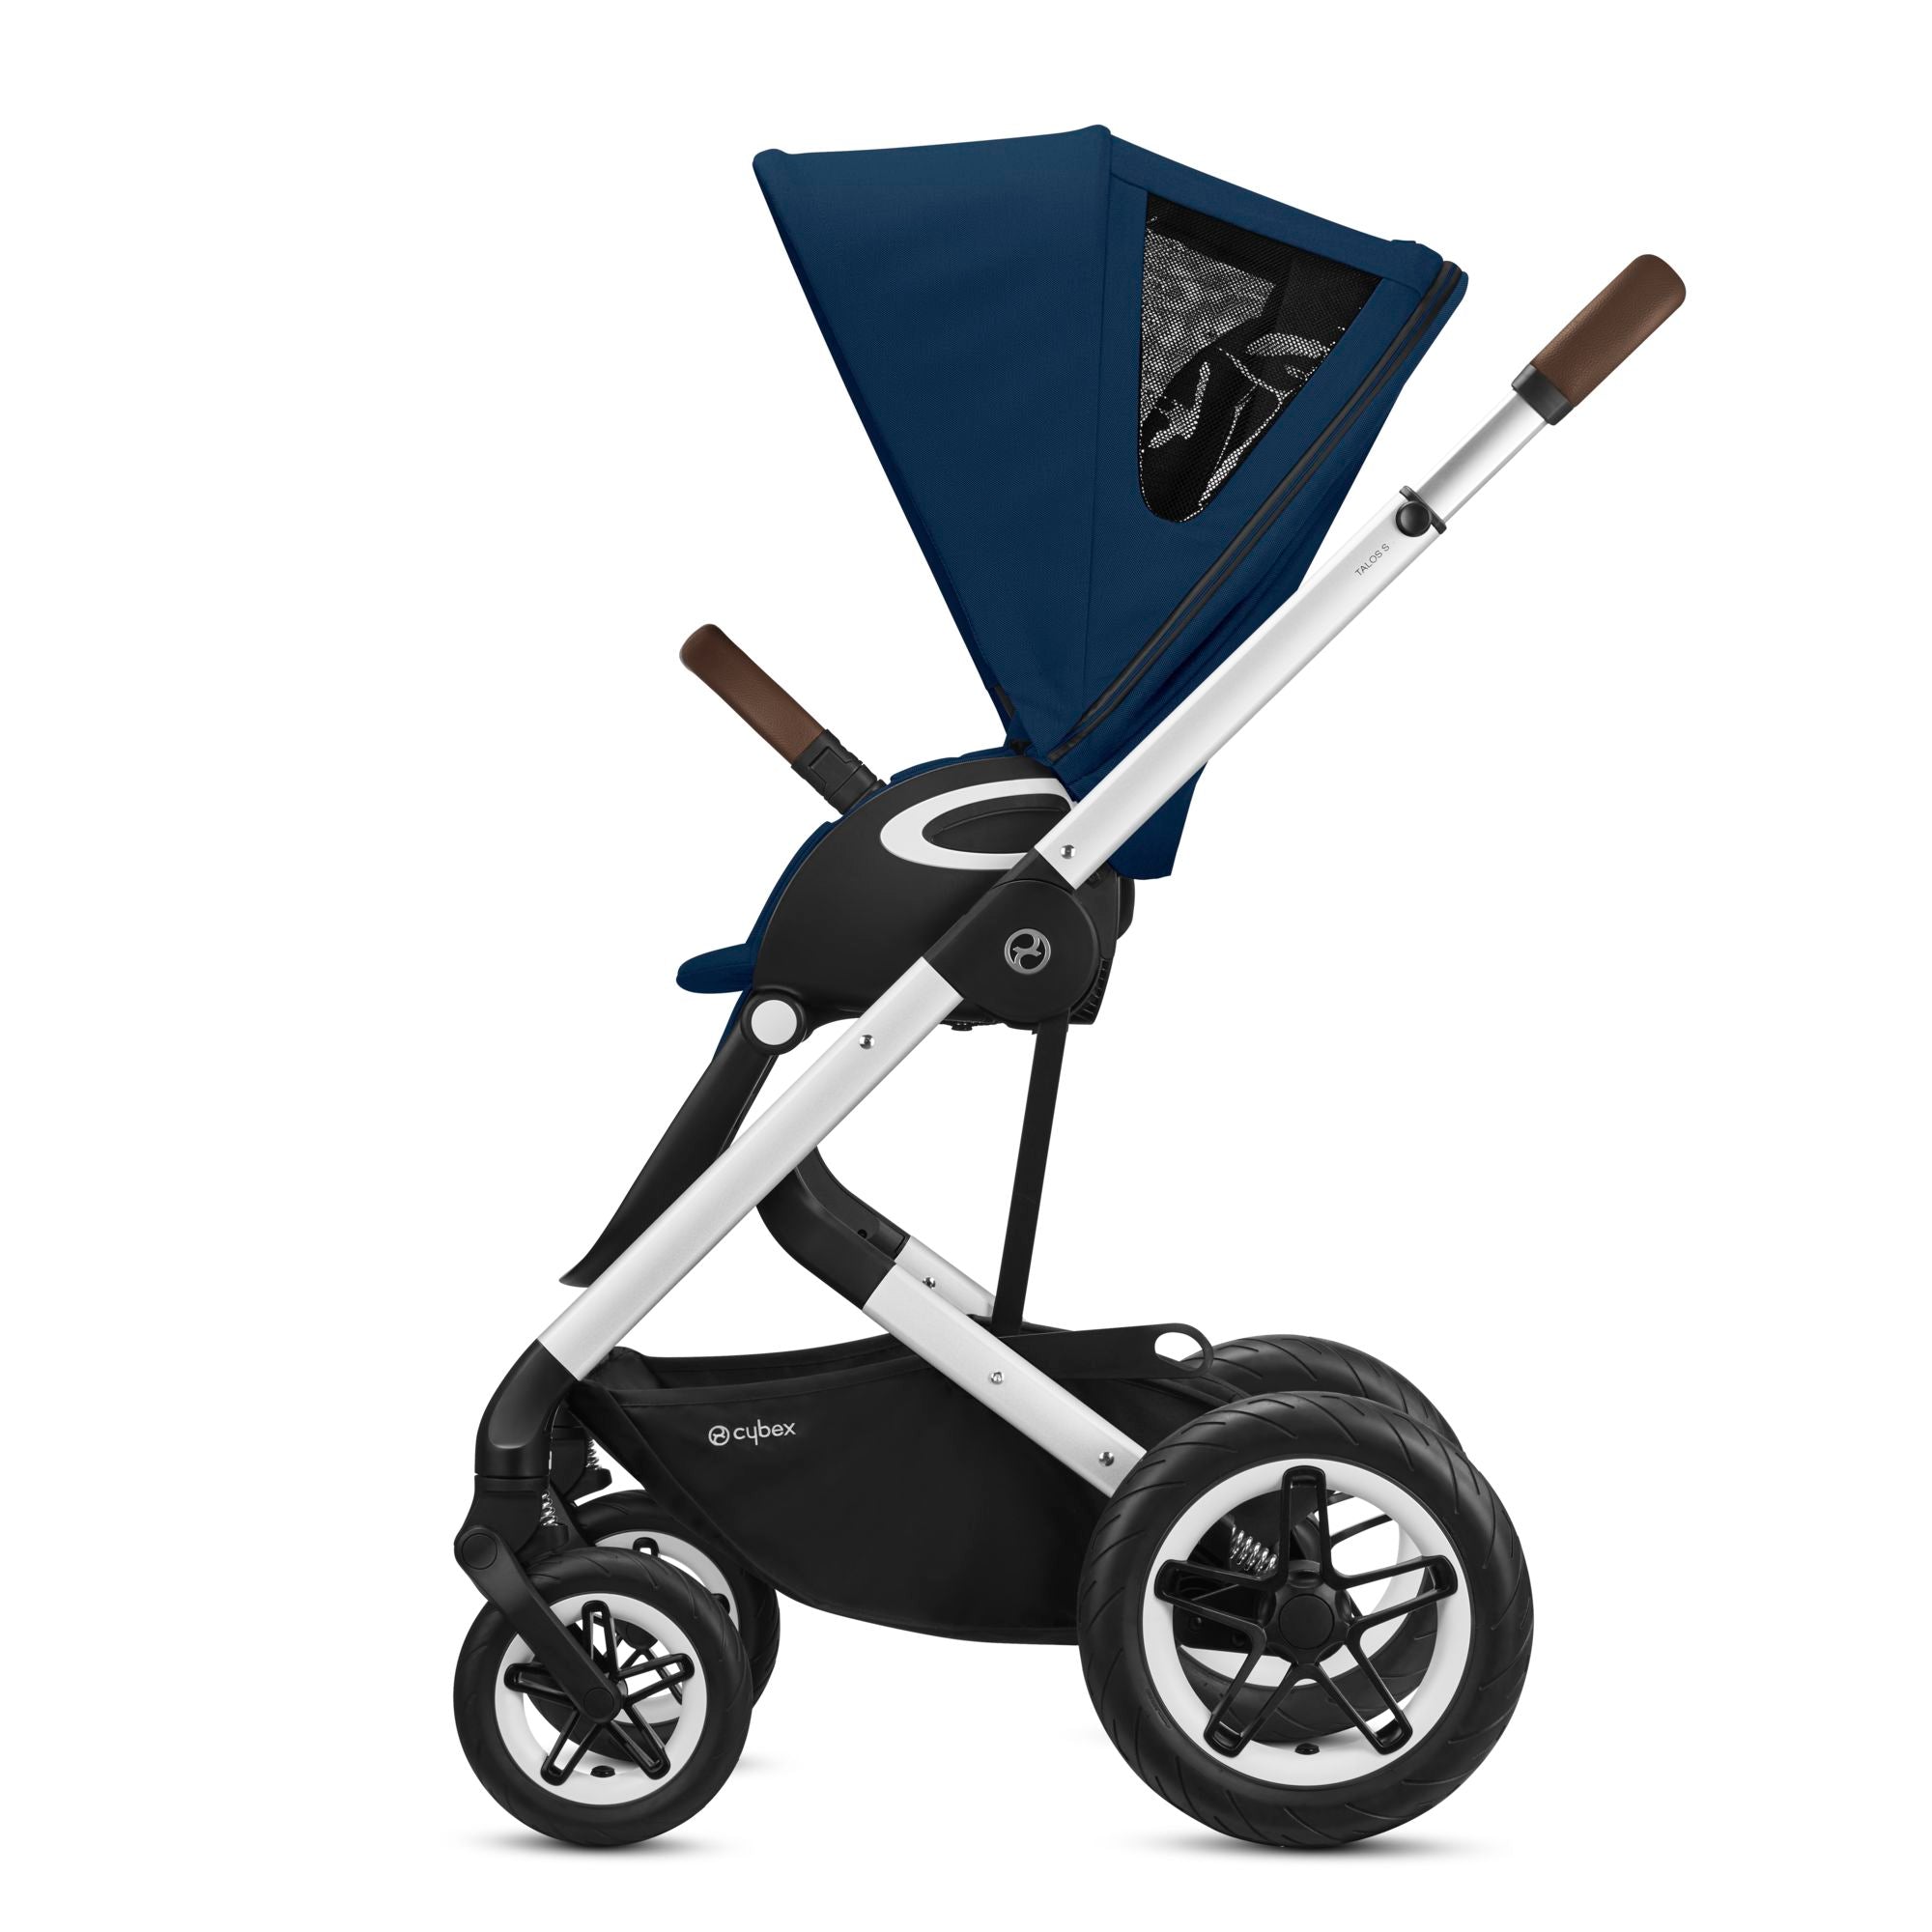  Cybex Balios S Lux Stroller FrontFacing or